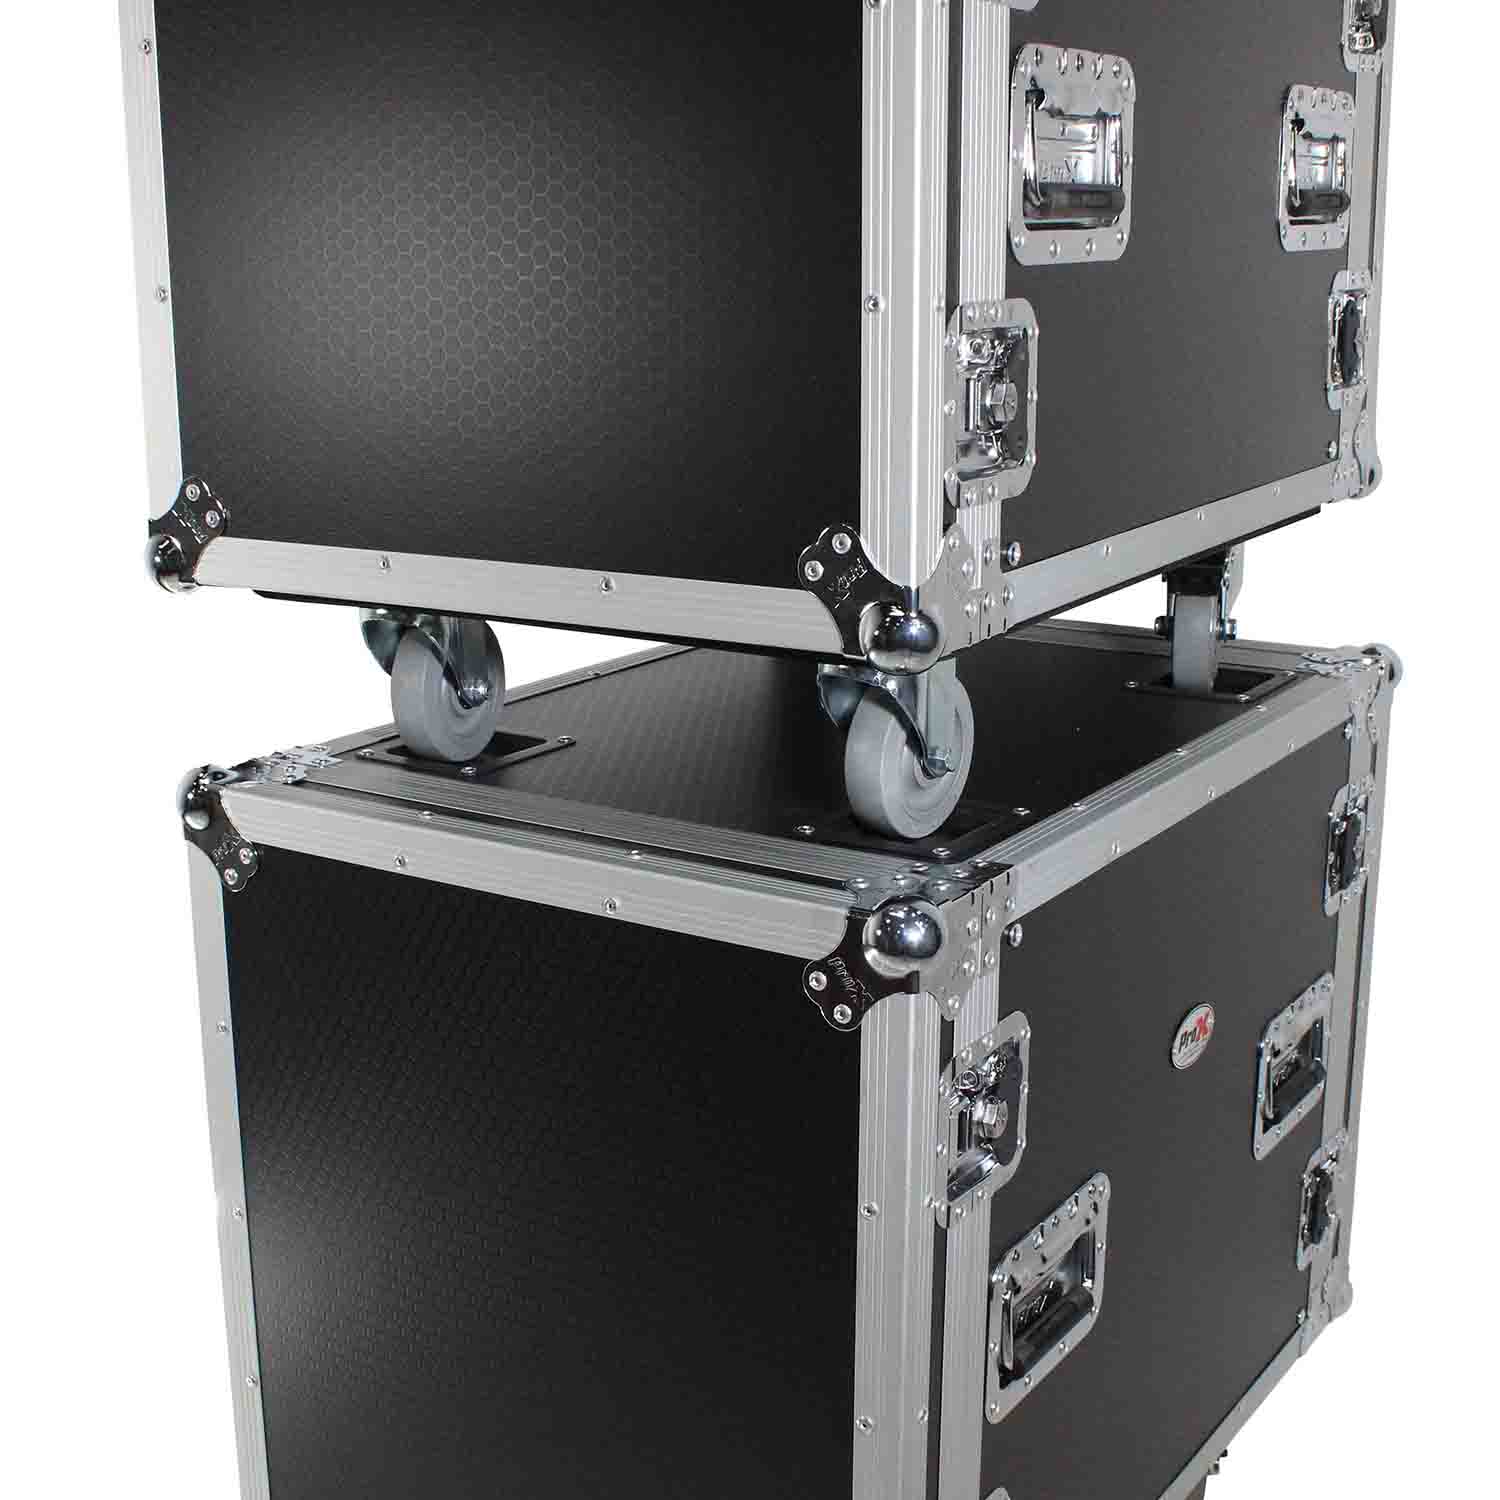 ProX T-10RSS24 10U Space Rack Mount Flight Case 24 Inch Depth with Casters - Hollywood DJ